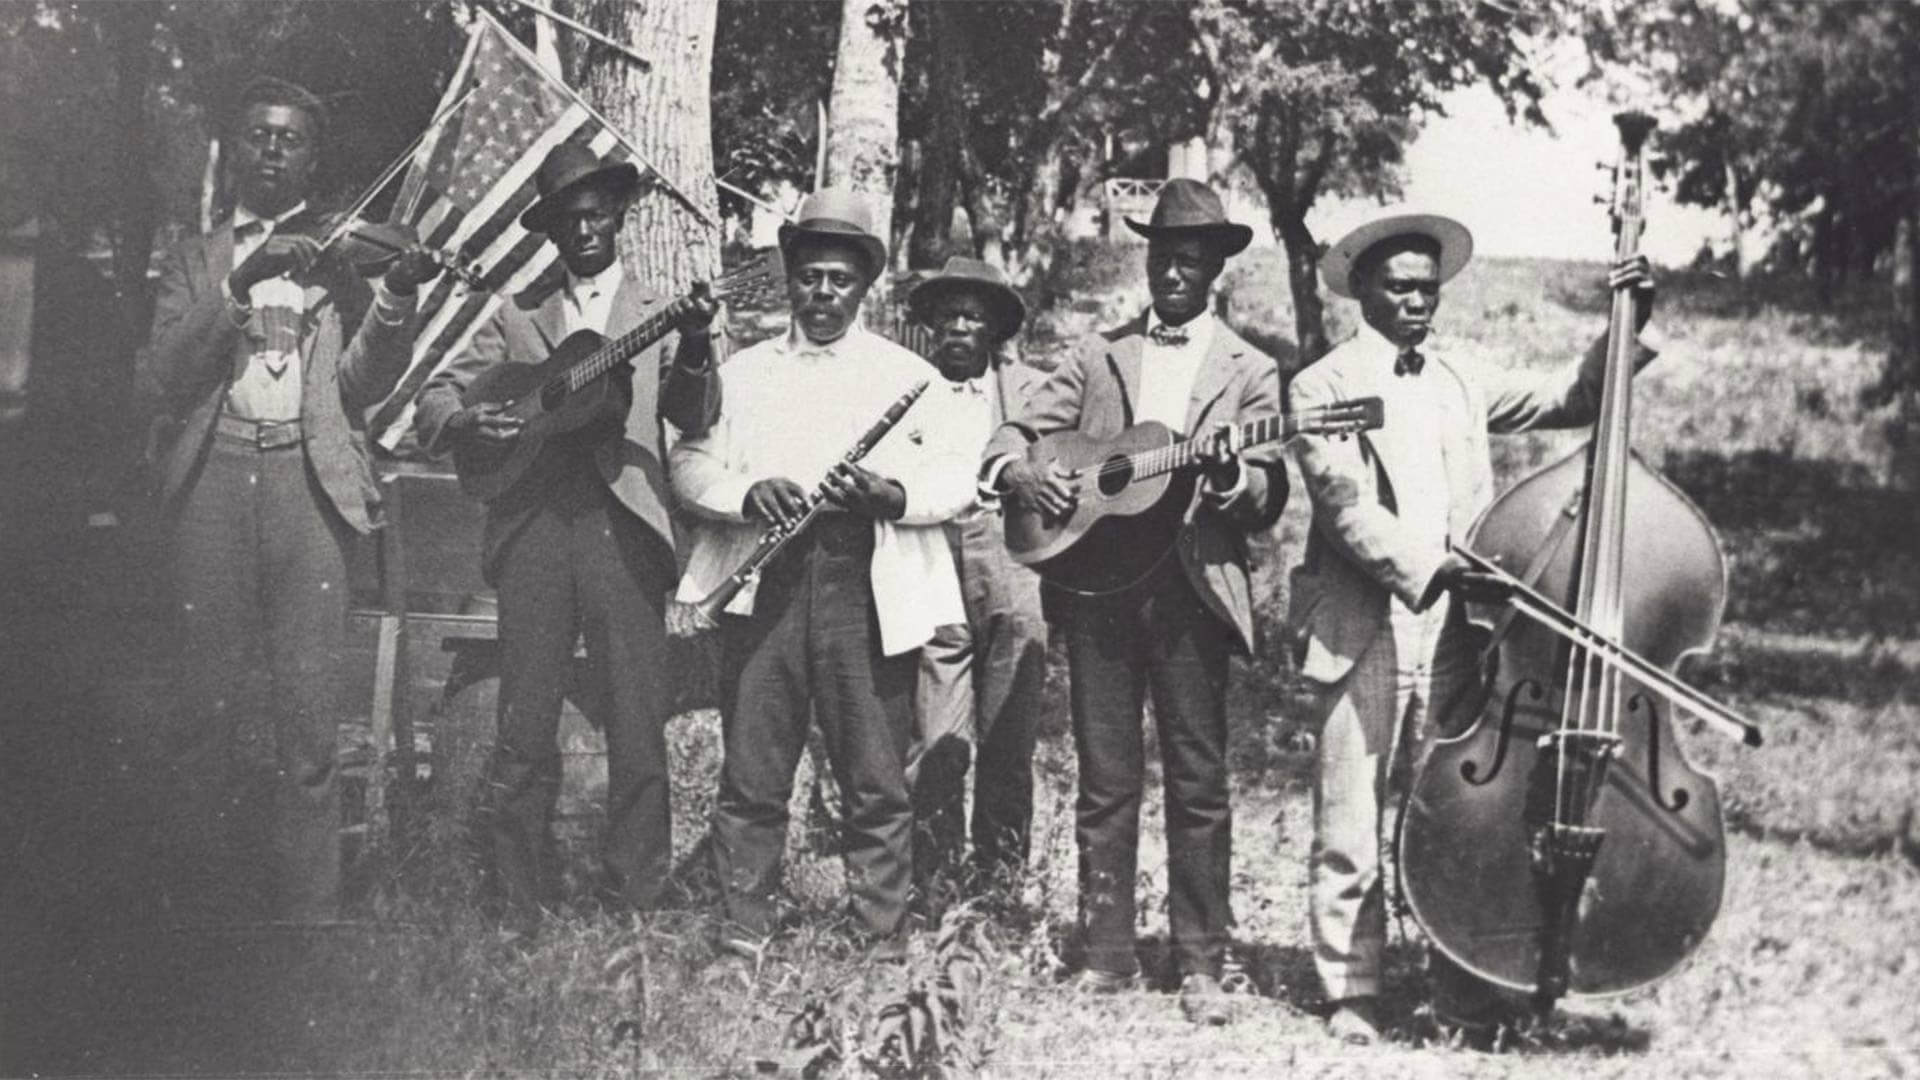 Band at a Juneteenth celebration in 1900